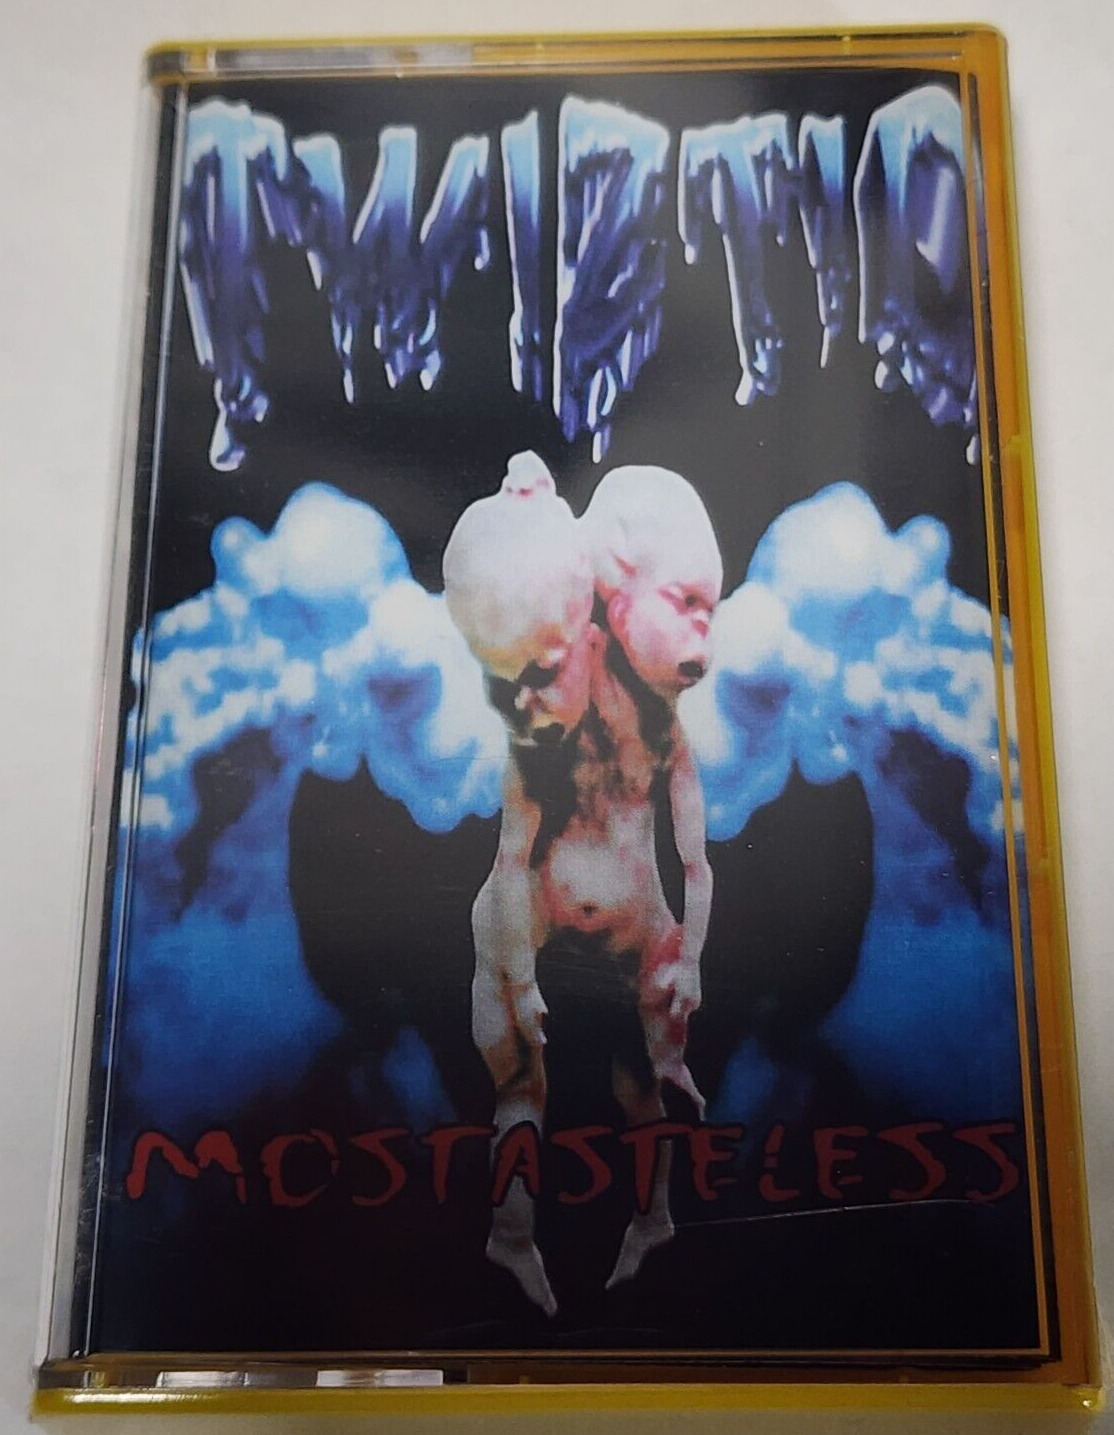 NEW Twiztid  Mostasteless YELLOW CASE tape ICP Psychopathic Rare oop FETUS